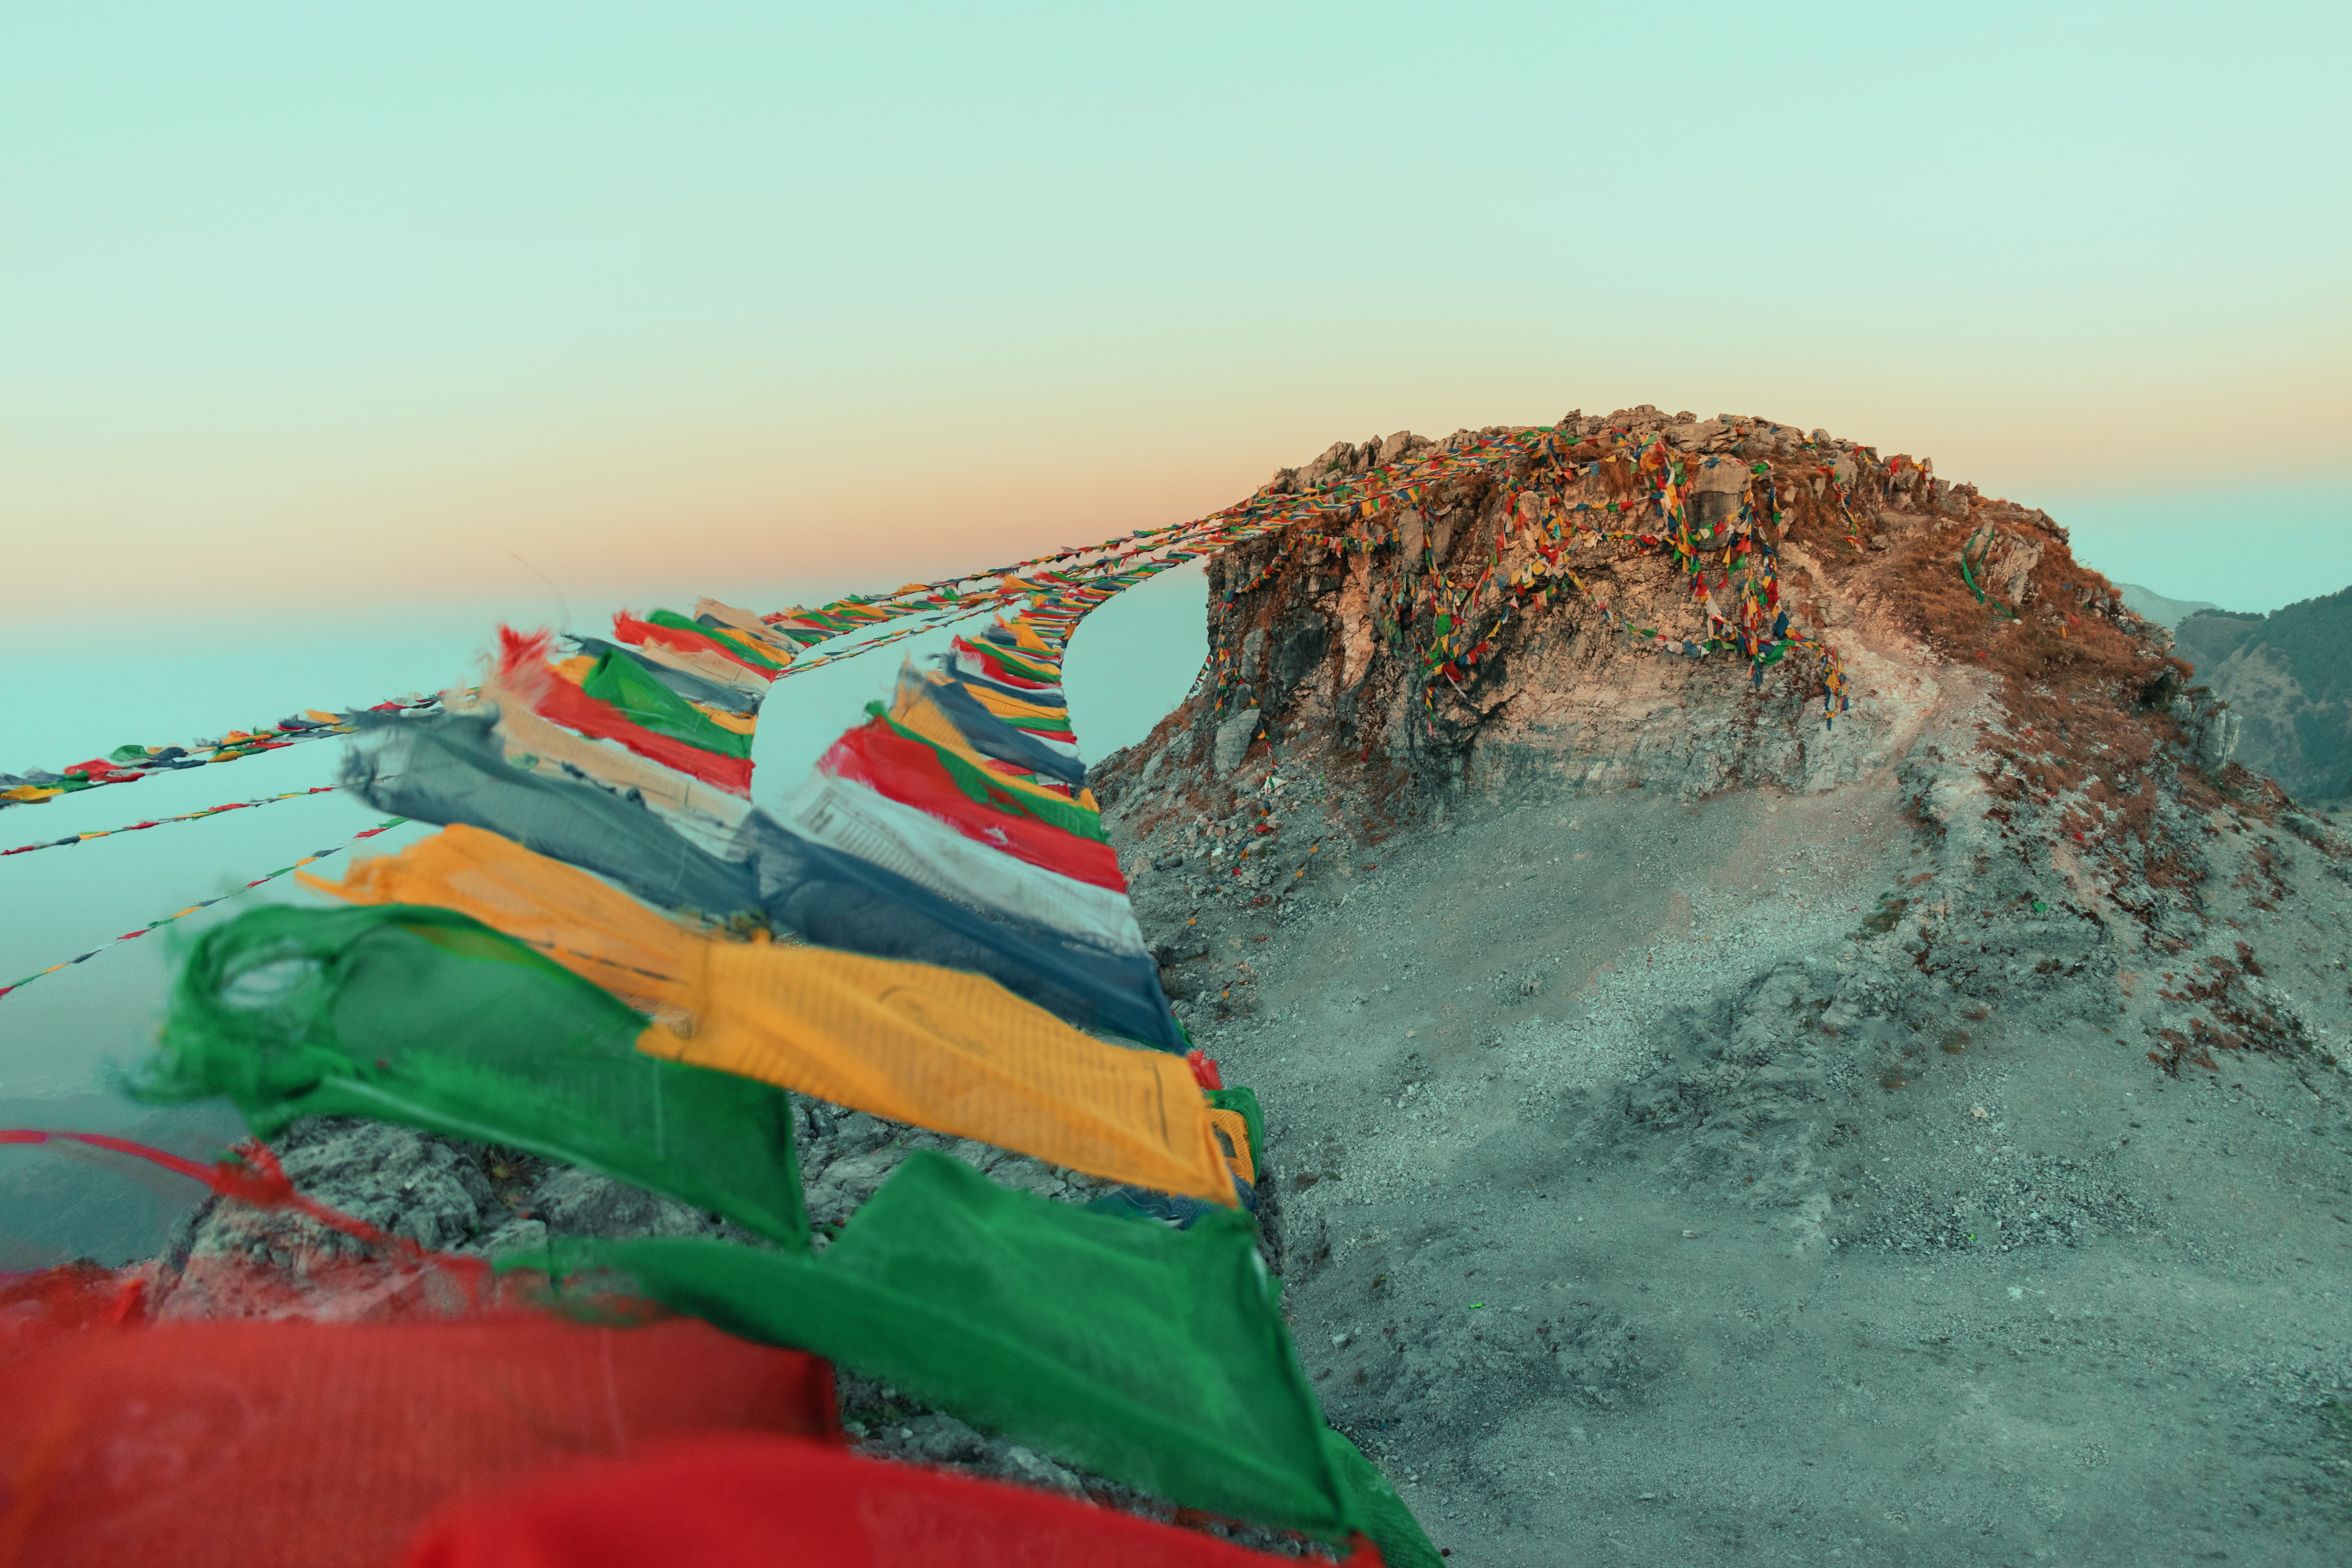 Prayer flags in the Himalayan mountains.